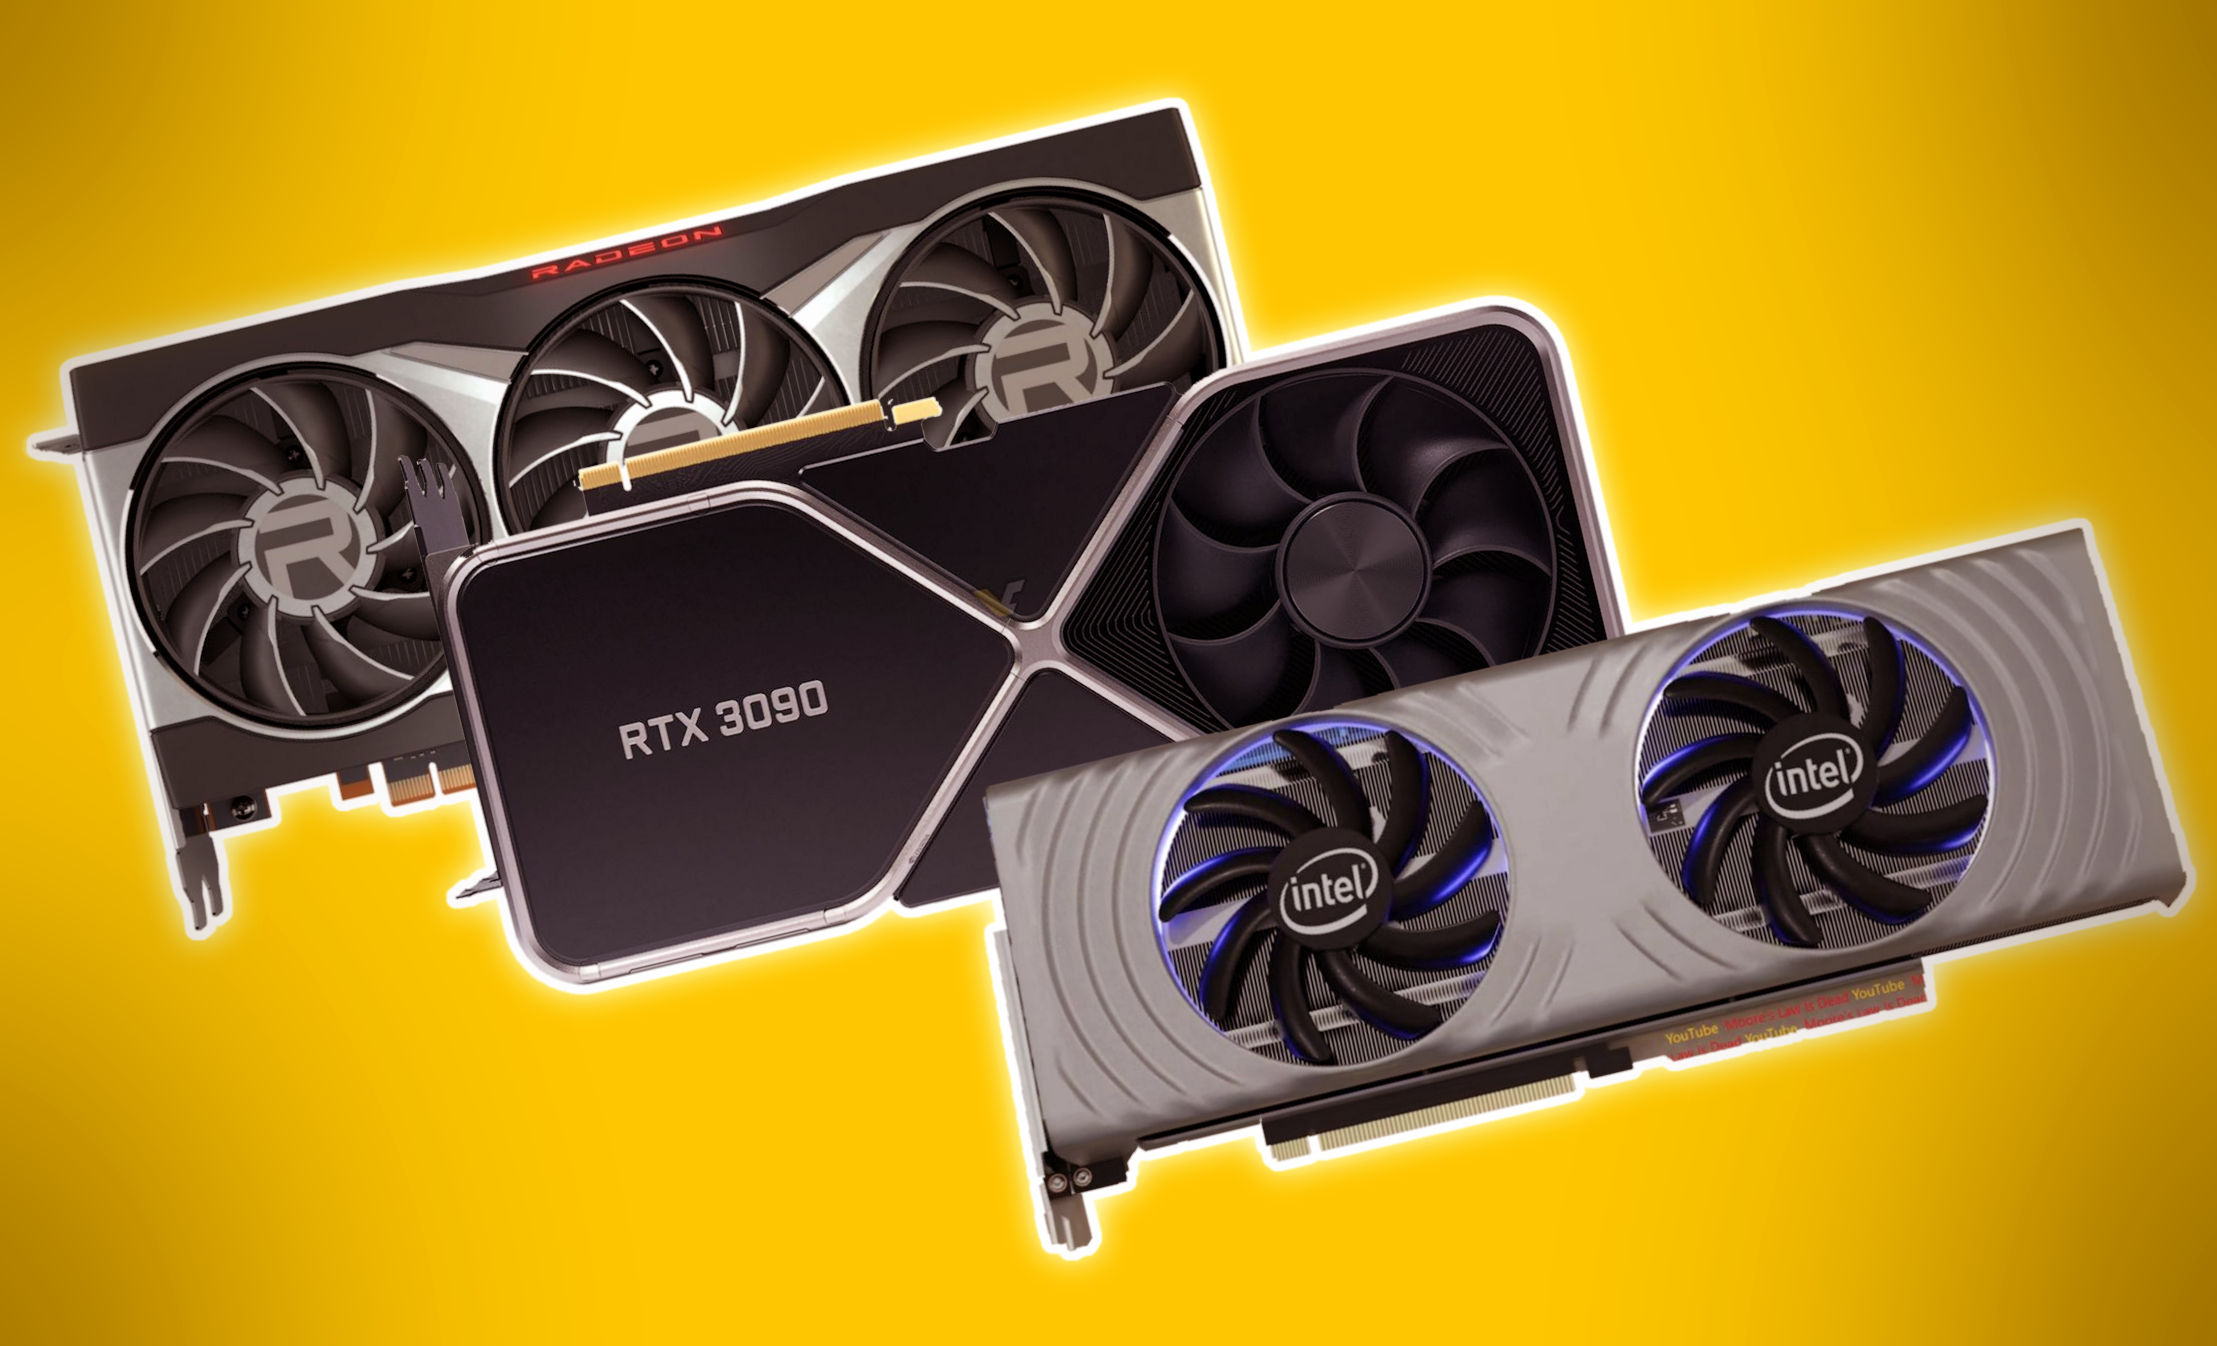 AMD, and NVIDIA all to release new desktop graphics cards the next few months VideoCardz.com